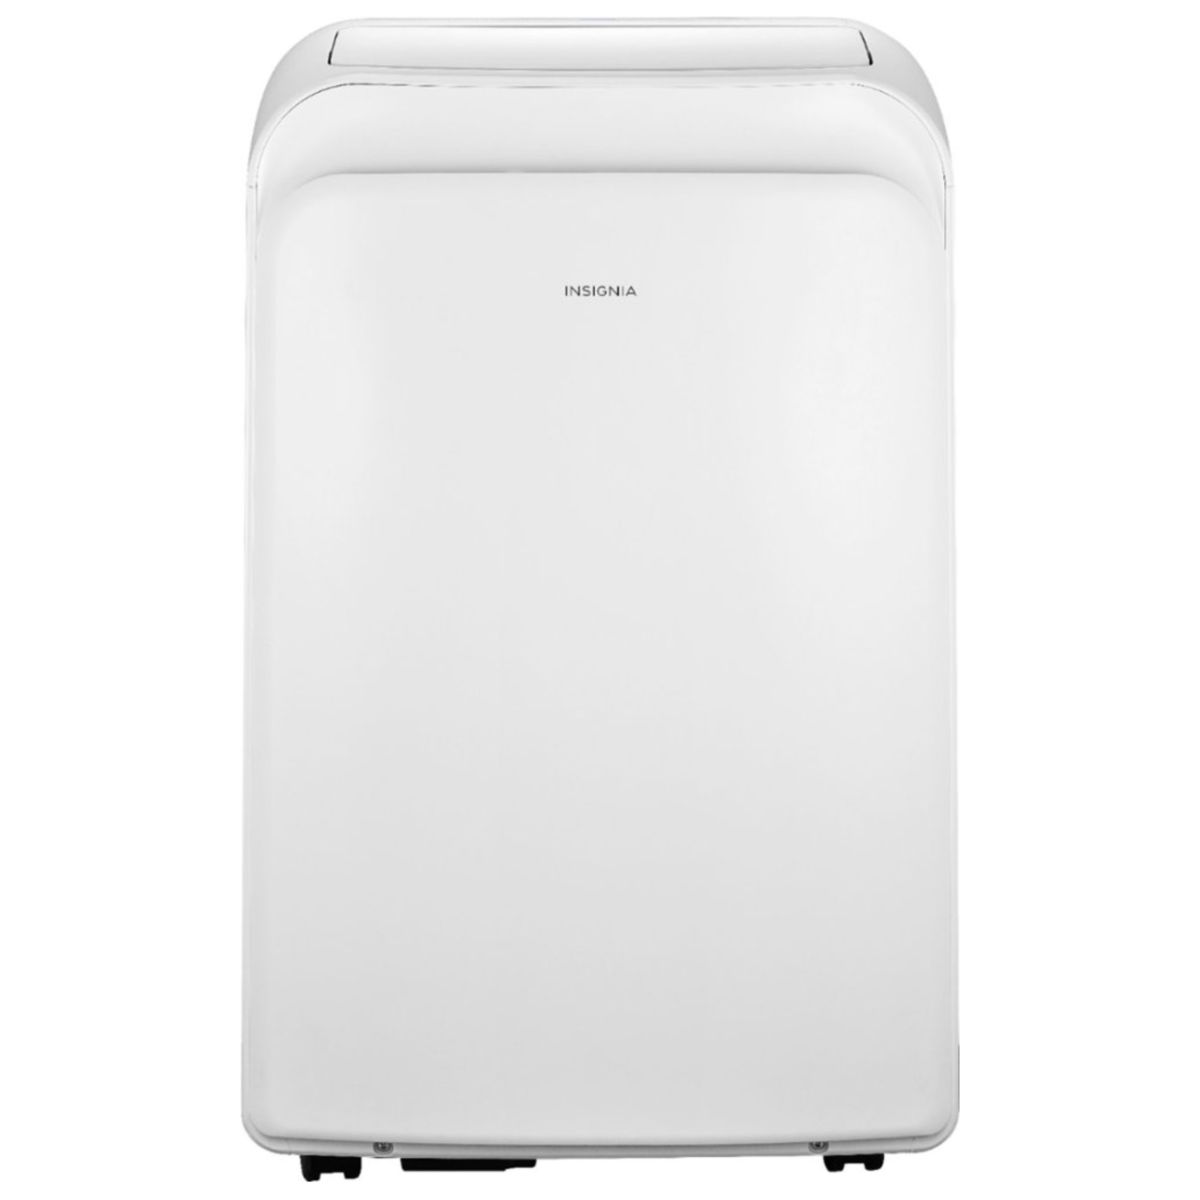 Insignia NS-AC07PWH1 300 Sq. Ft. Portable Air Conditioner